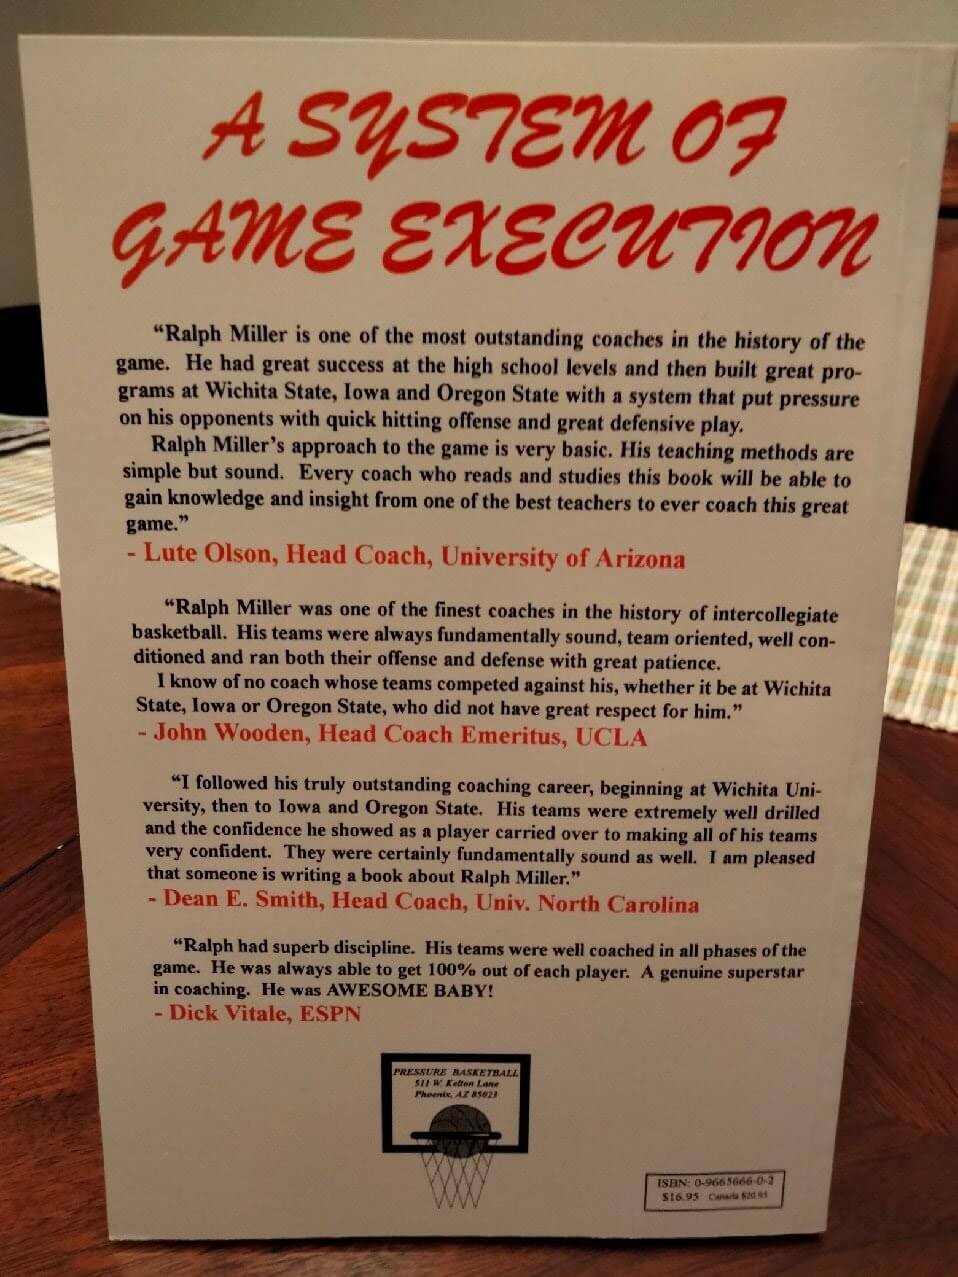 A System Of Game Execution back cover_optimized.jpg